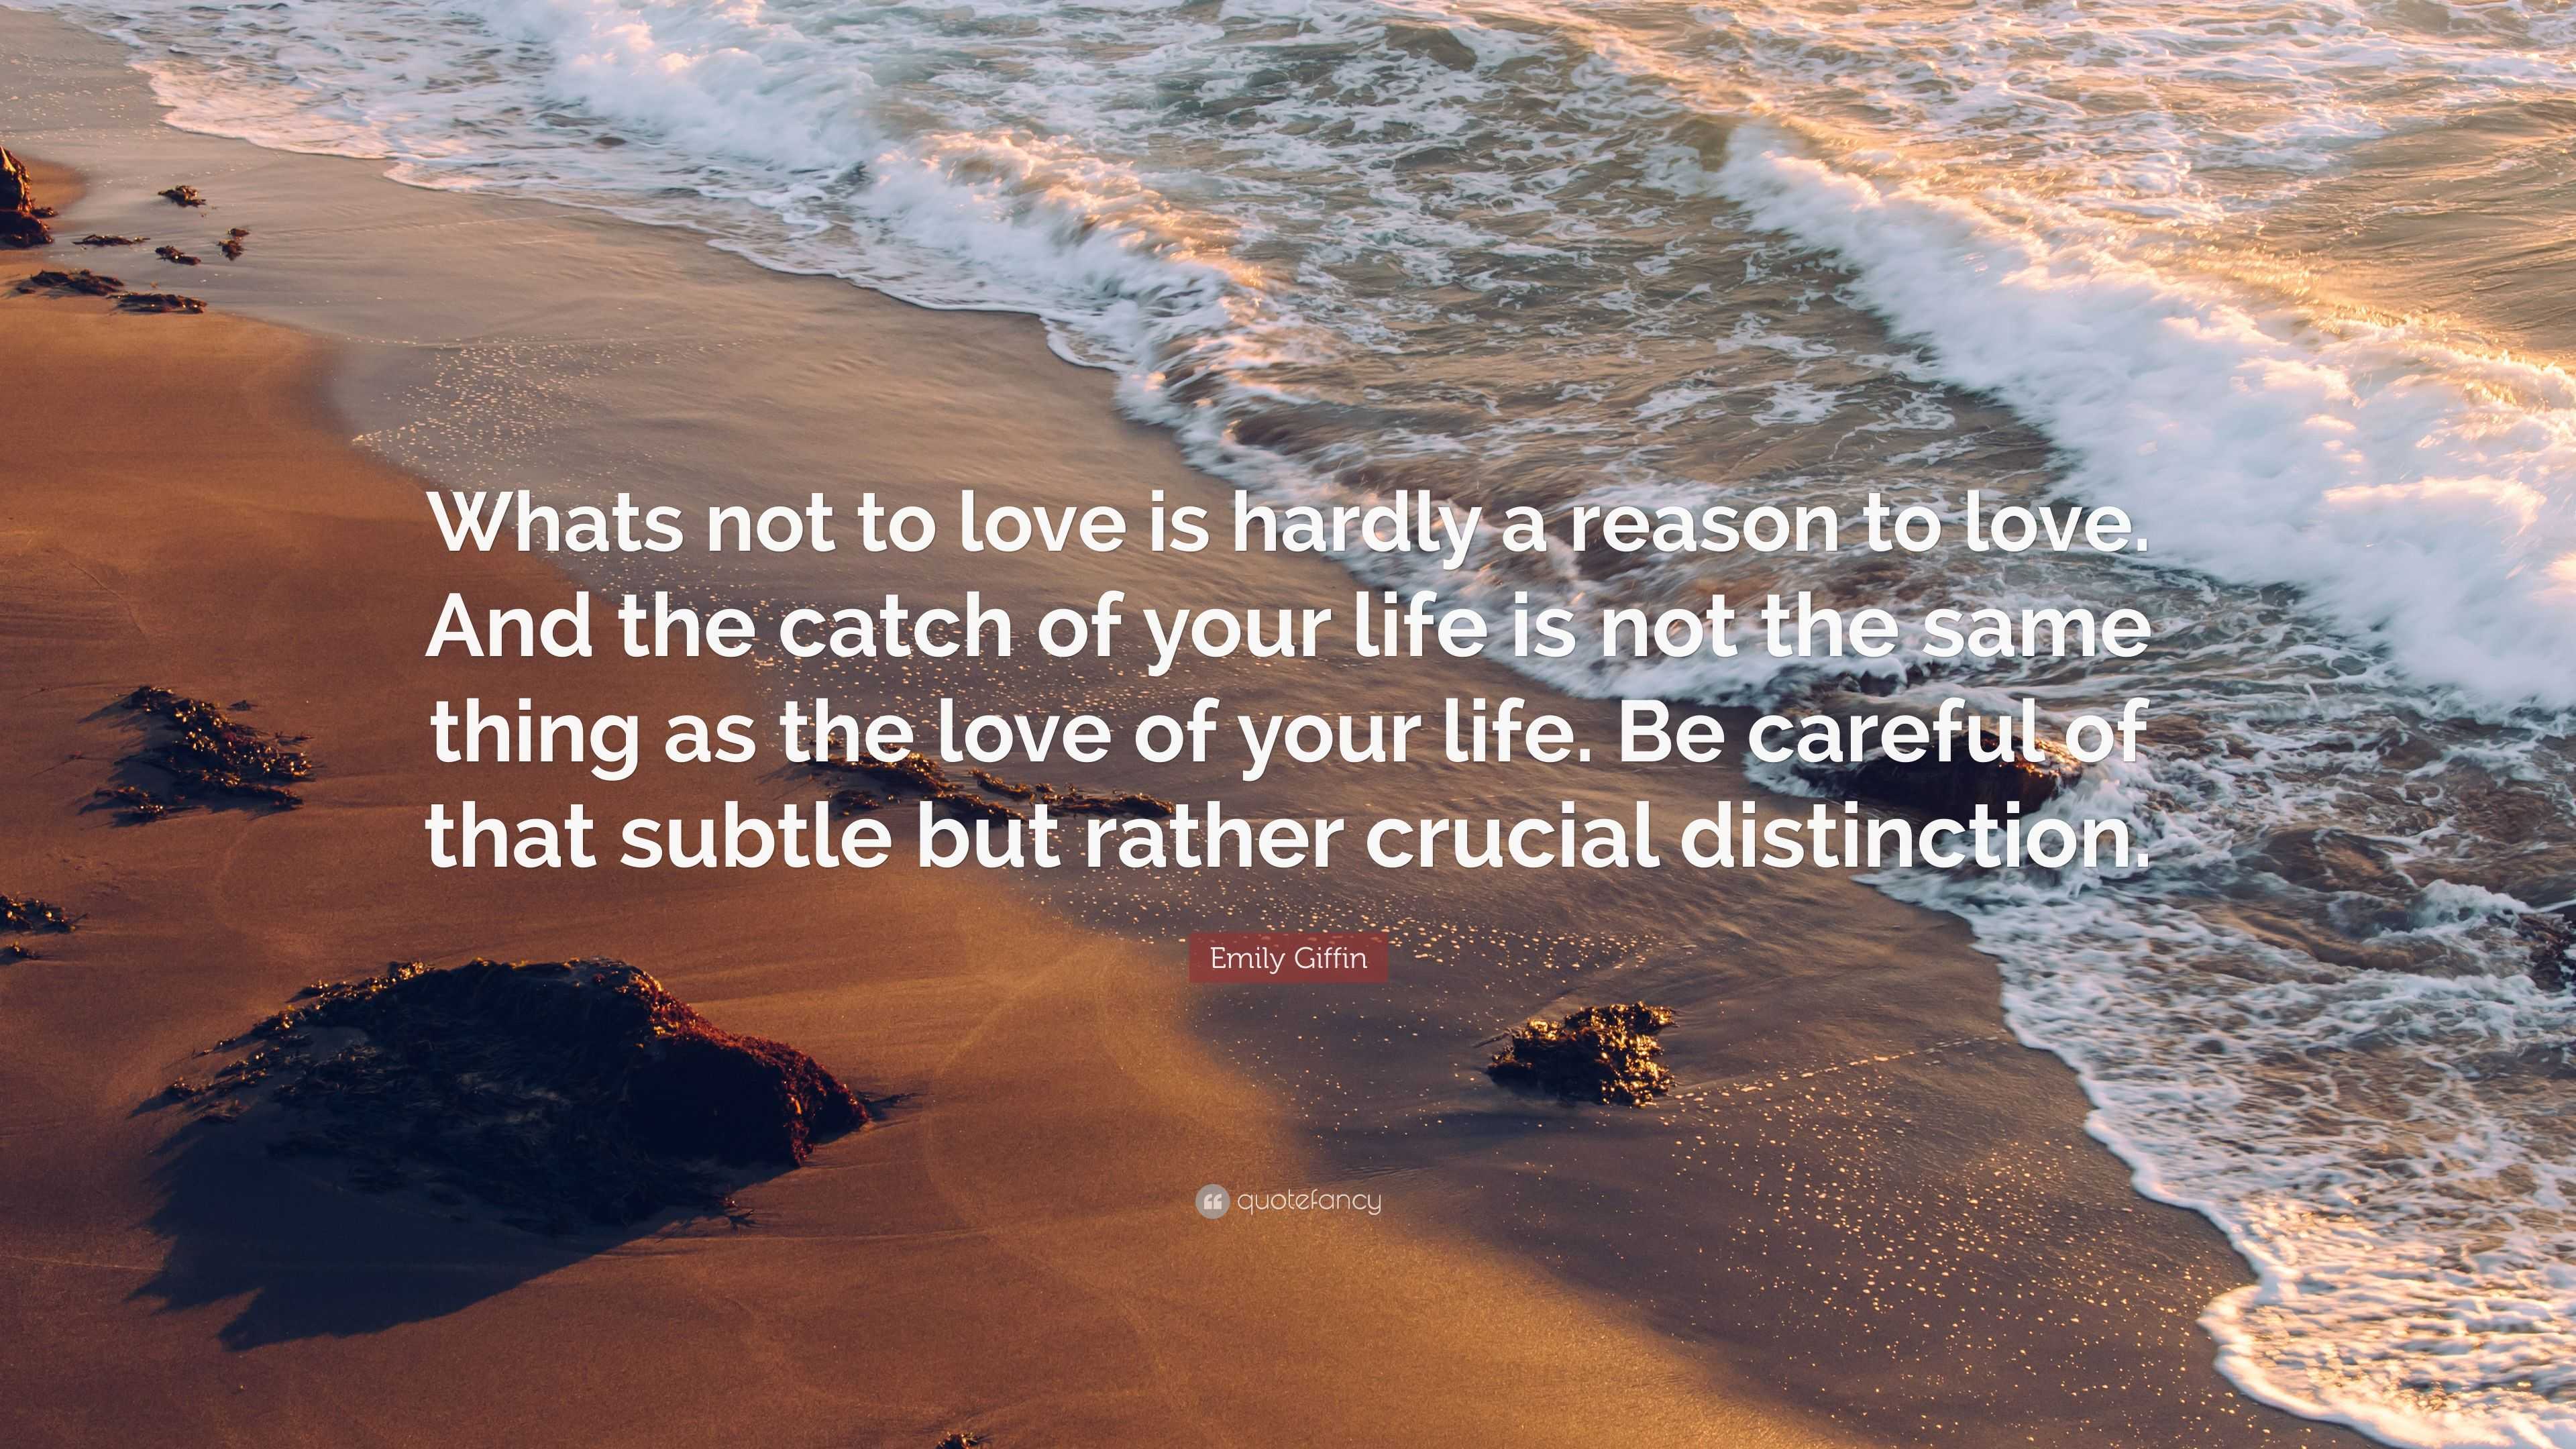 Emily Giffin Quote: “Whats not to love is hardly a reason to love. And ...